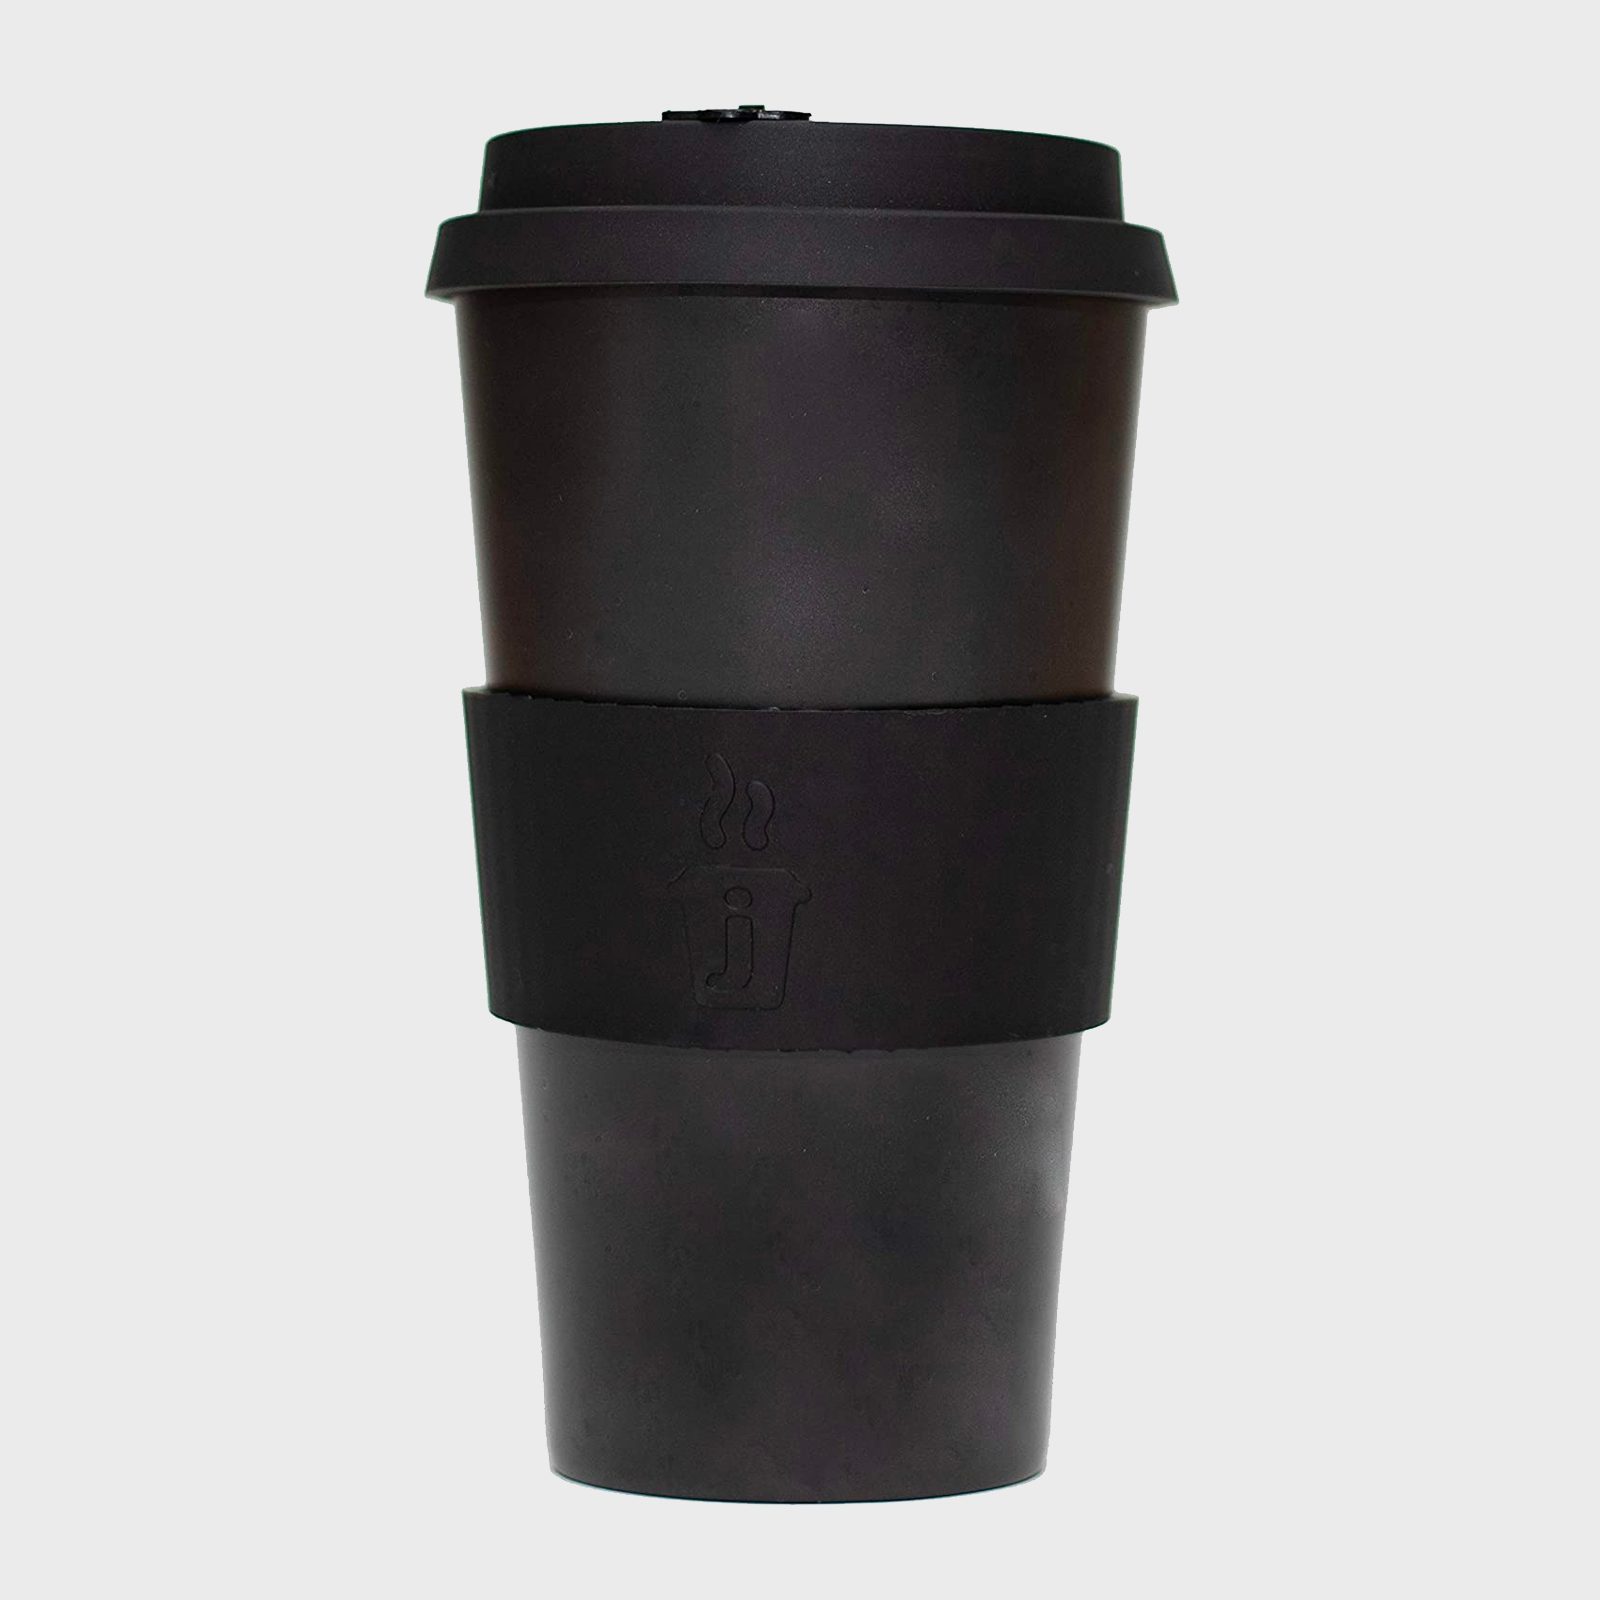 5 Essential Reasons Why You Should Invest in a Reusable Coffee Thermos